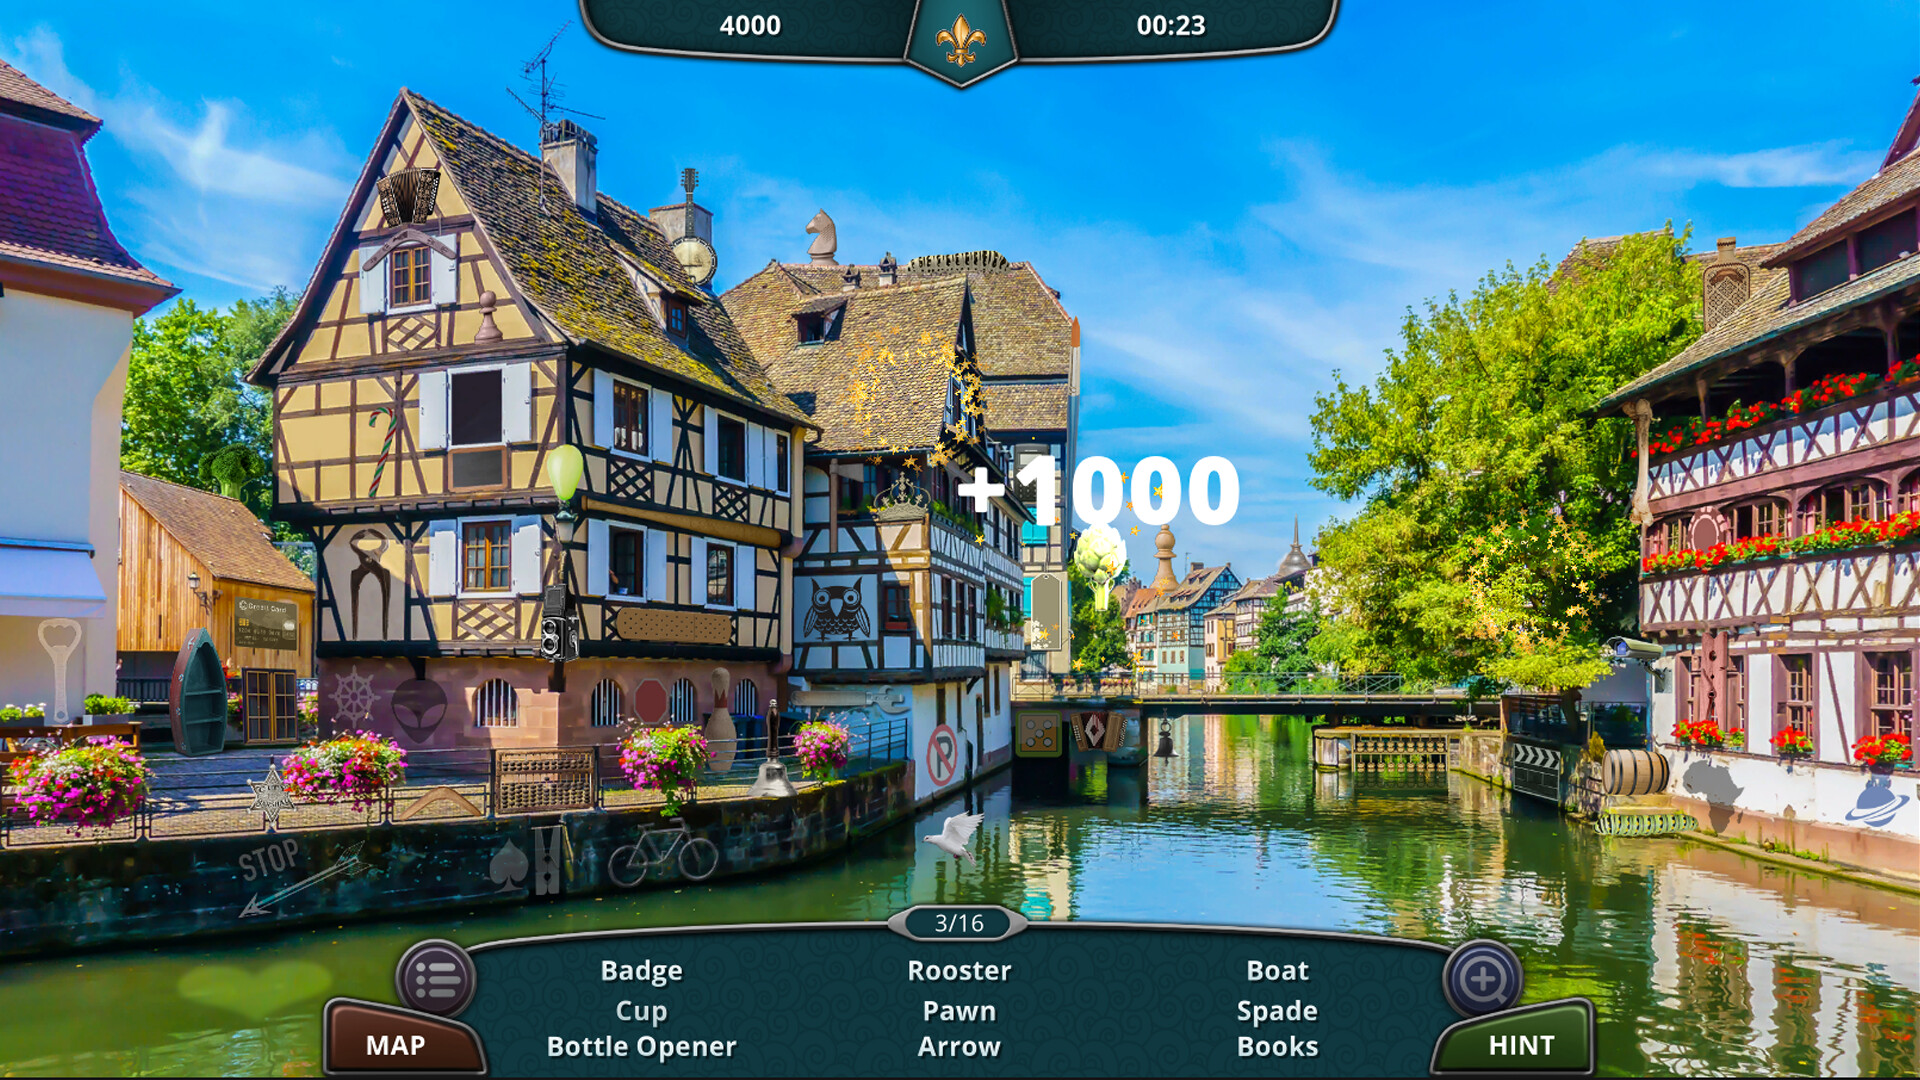 Vacation Paradise: France Collector's Edition Free Download